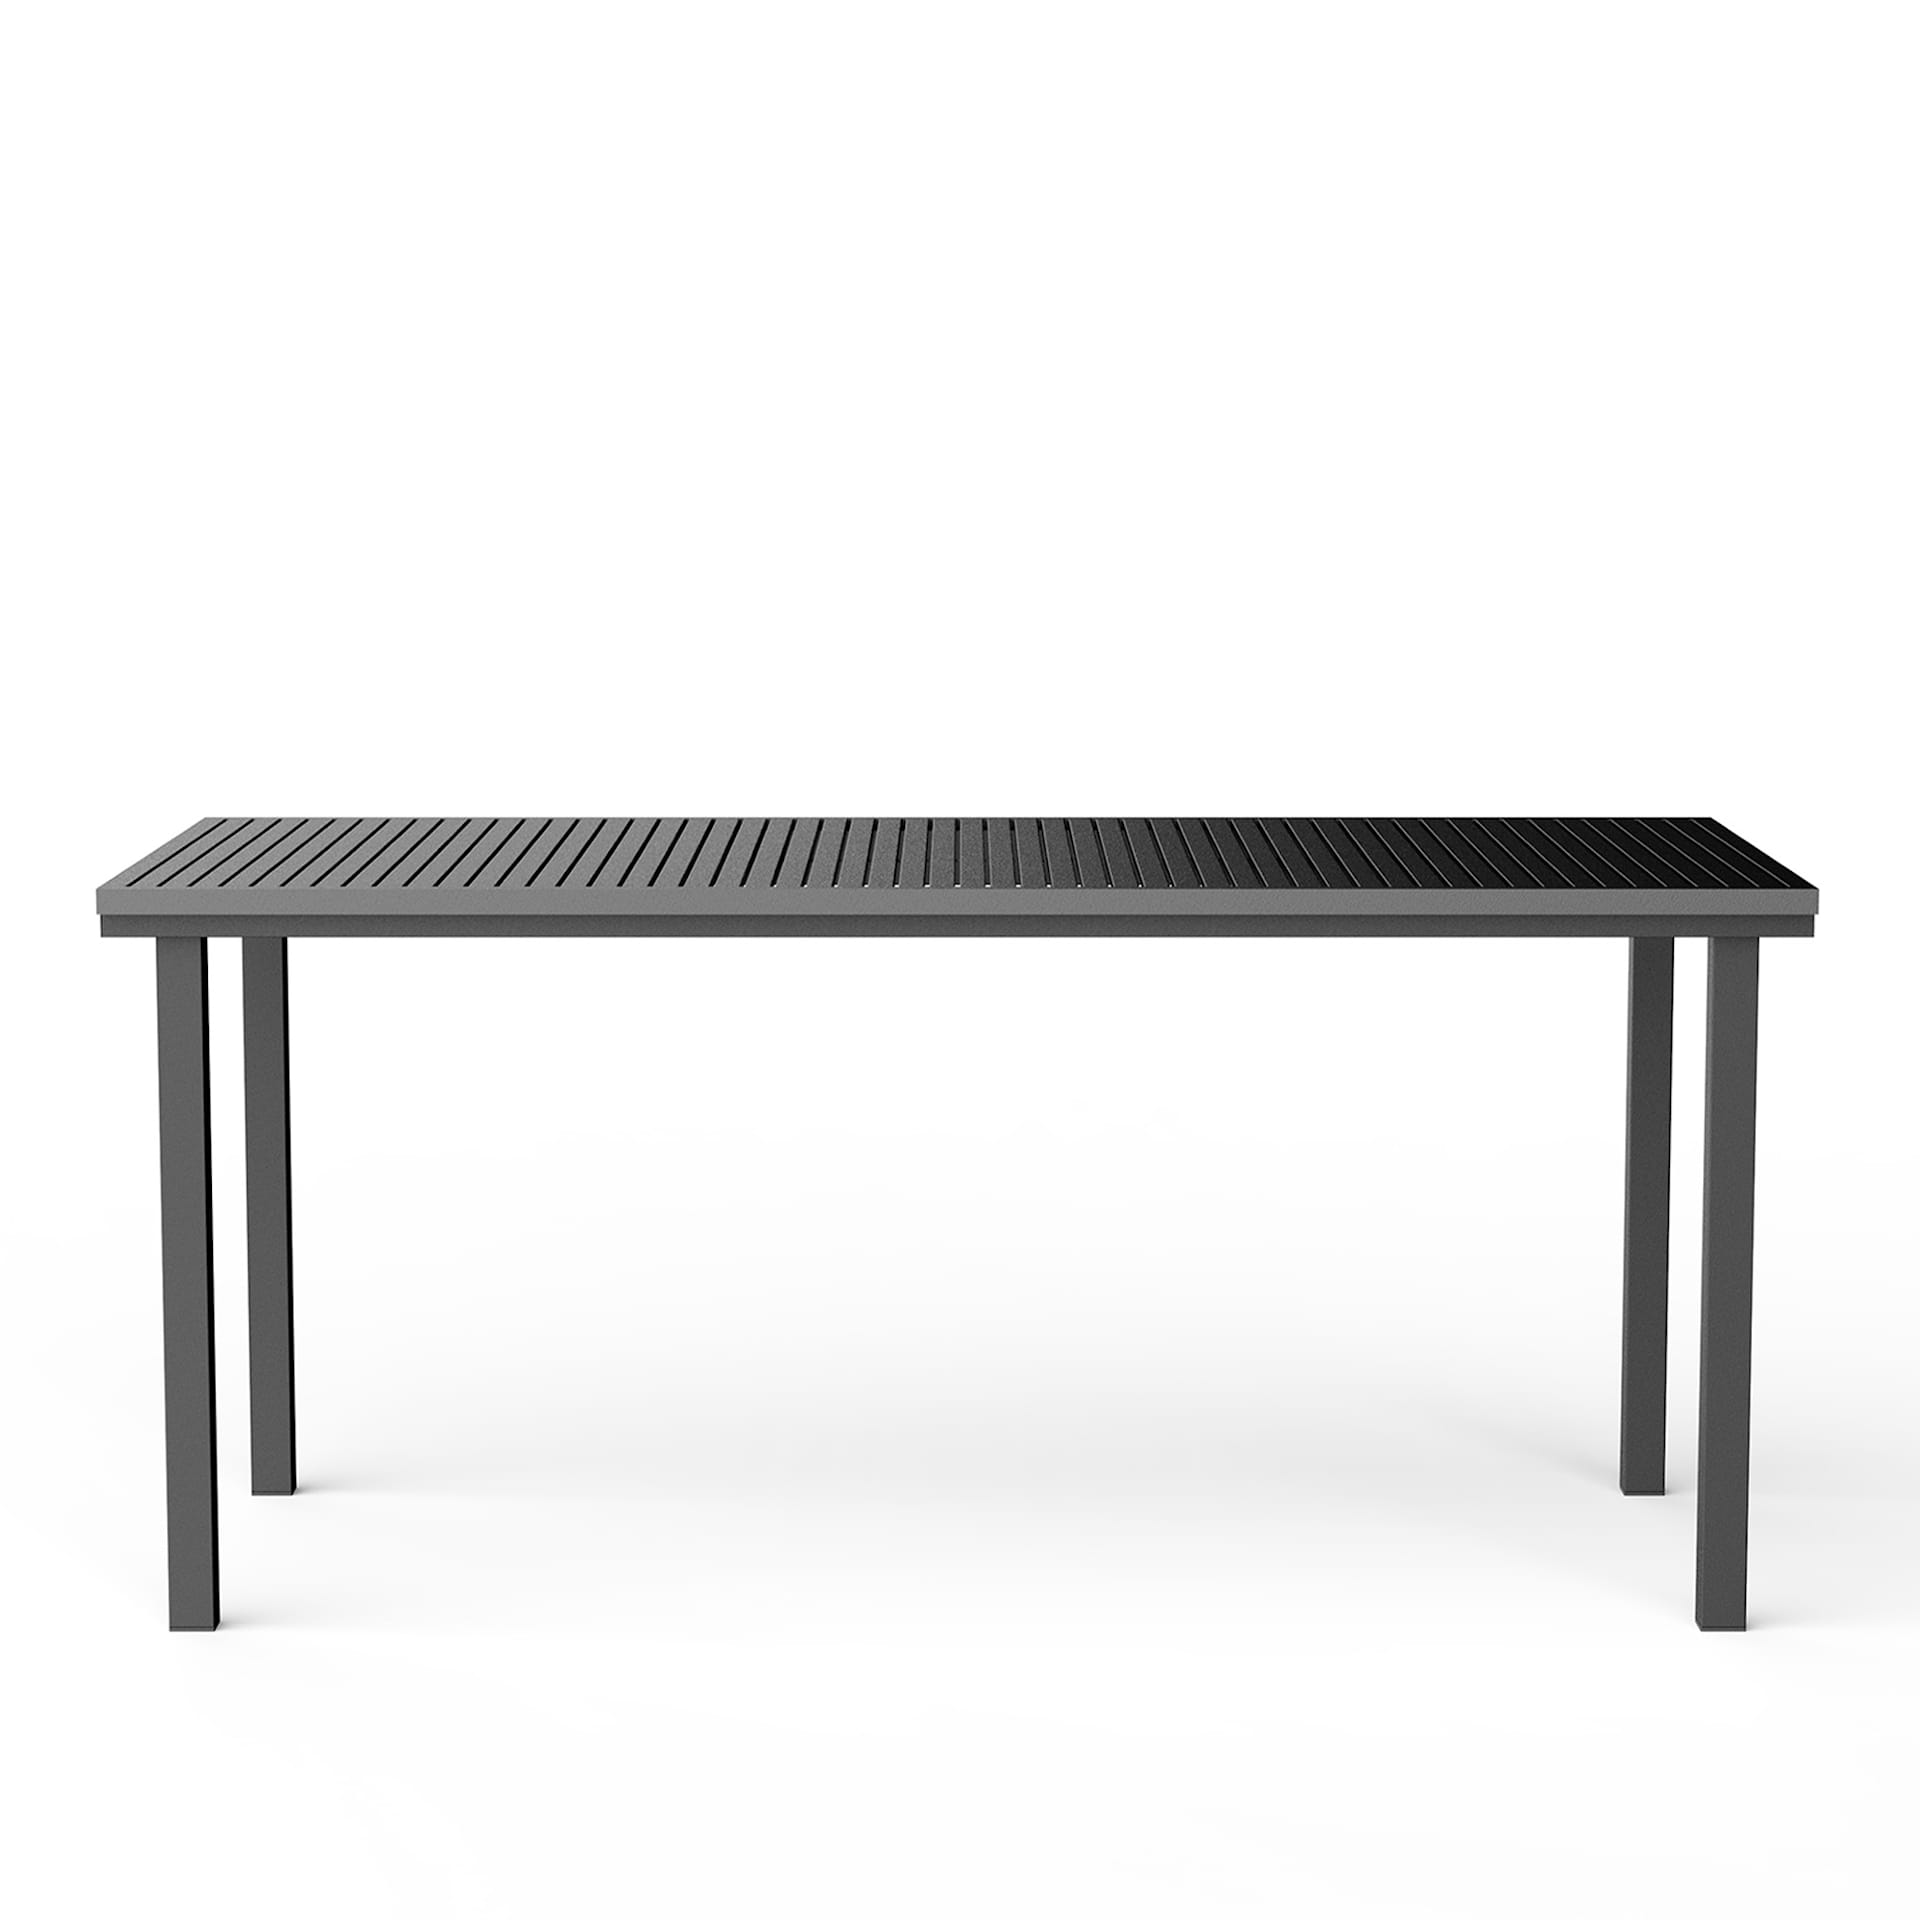 19 Outdoors Dining Table Table 167,5 x 80,5 cm - NINE - NO GA